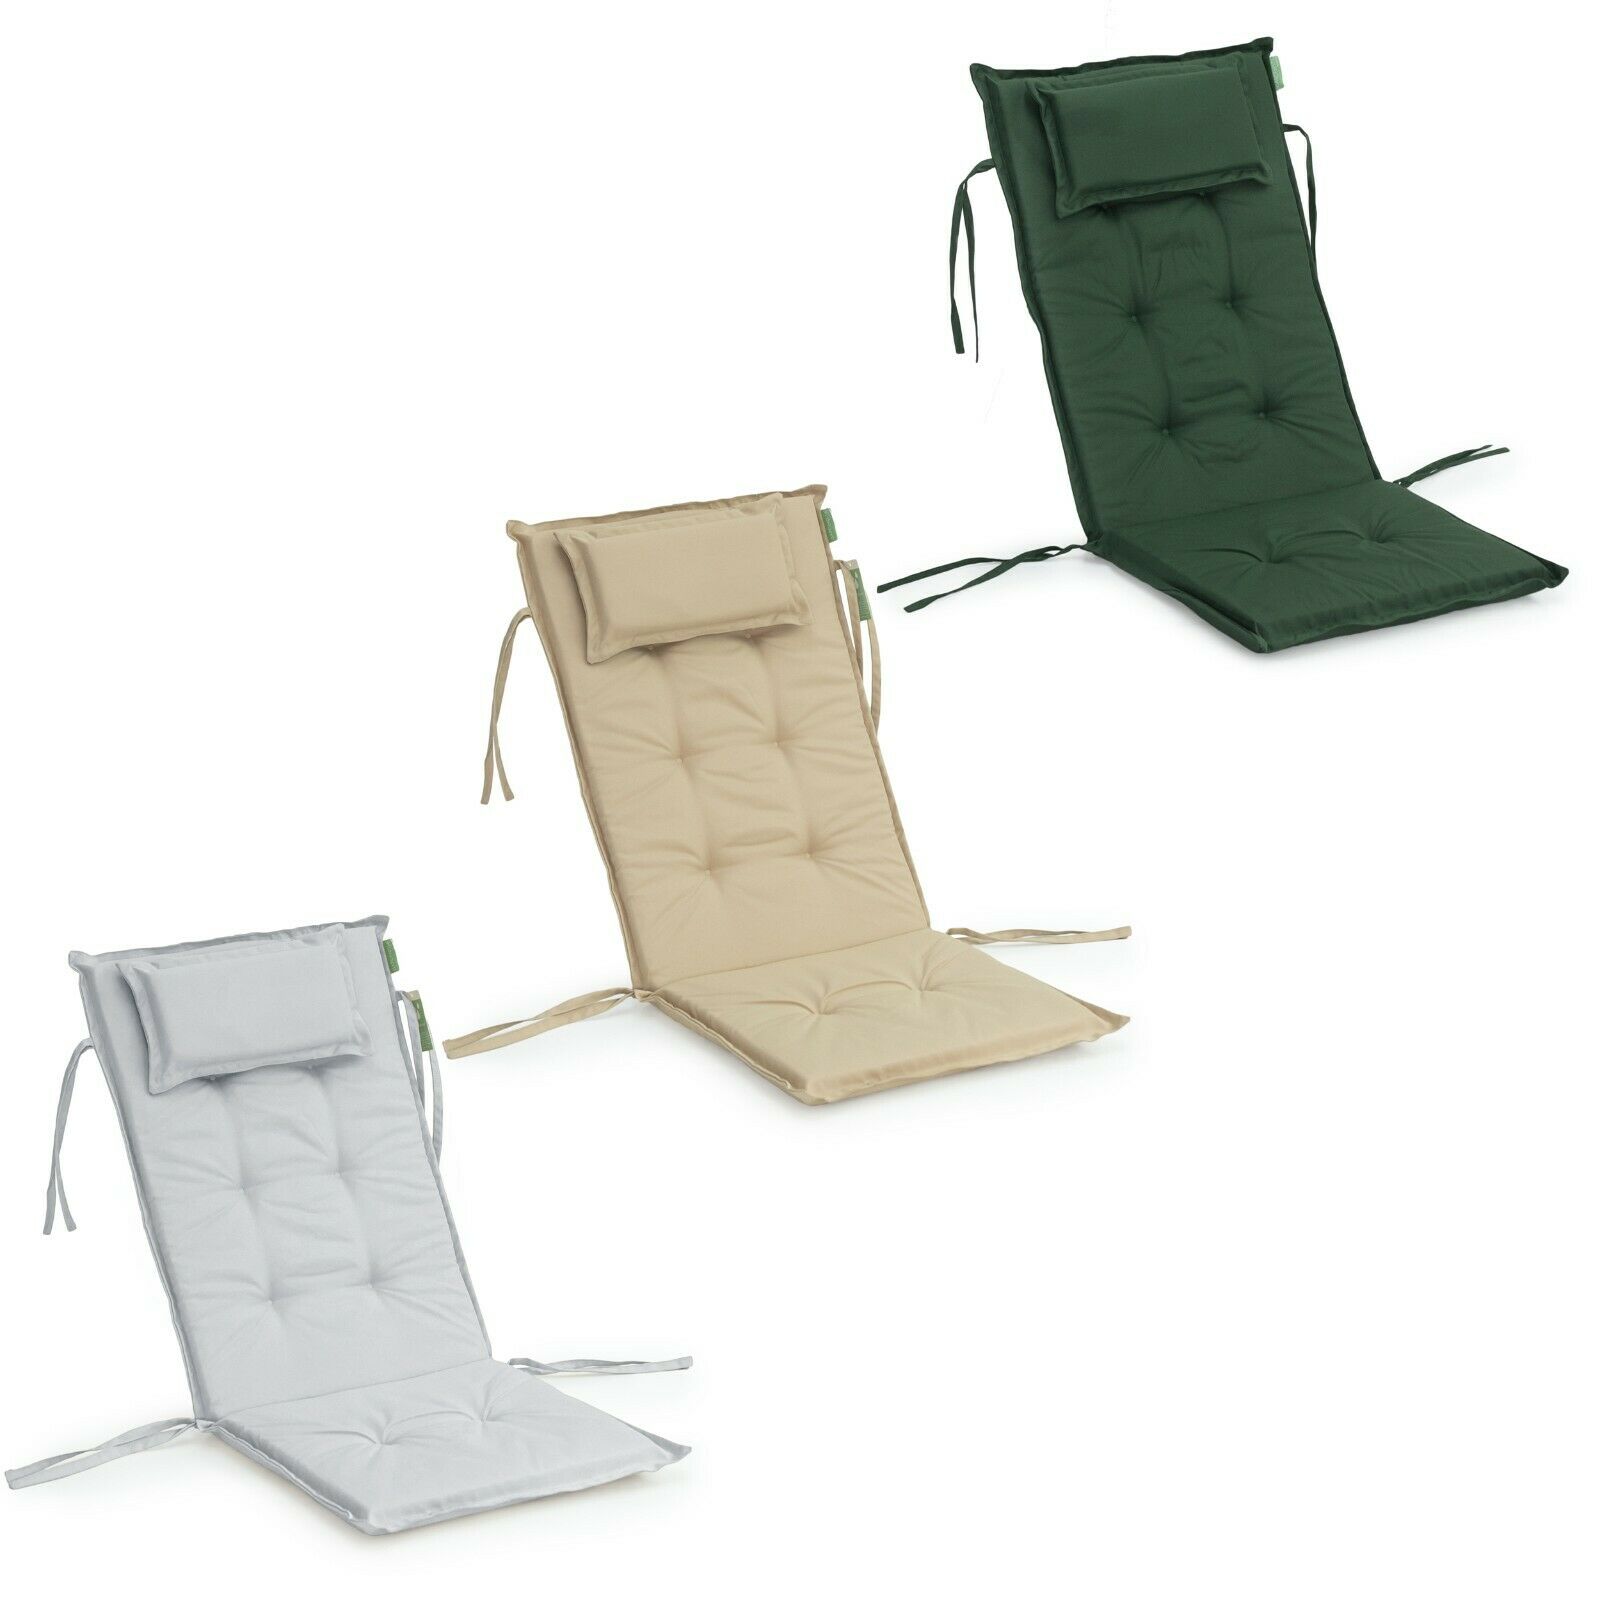 Outdoor High Back Luxury Chair Cushion Deck Patio Water Resistant Garden Pads Ebay